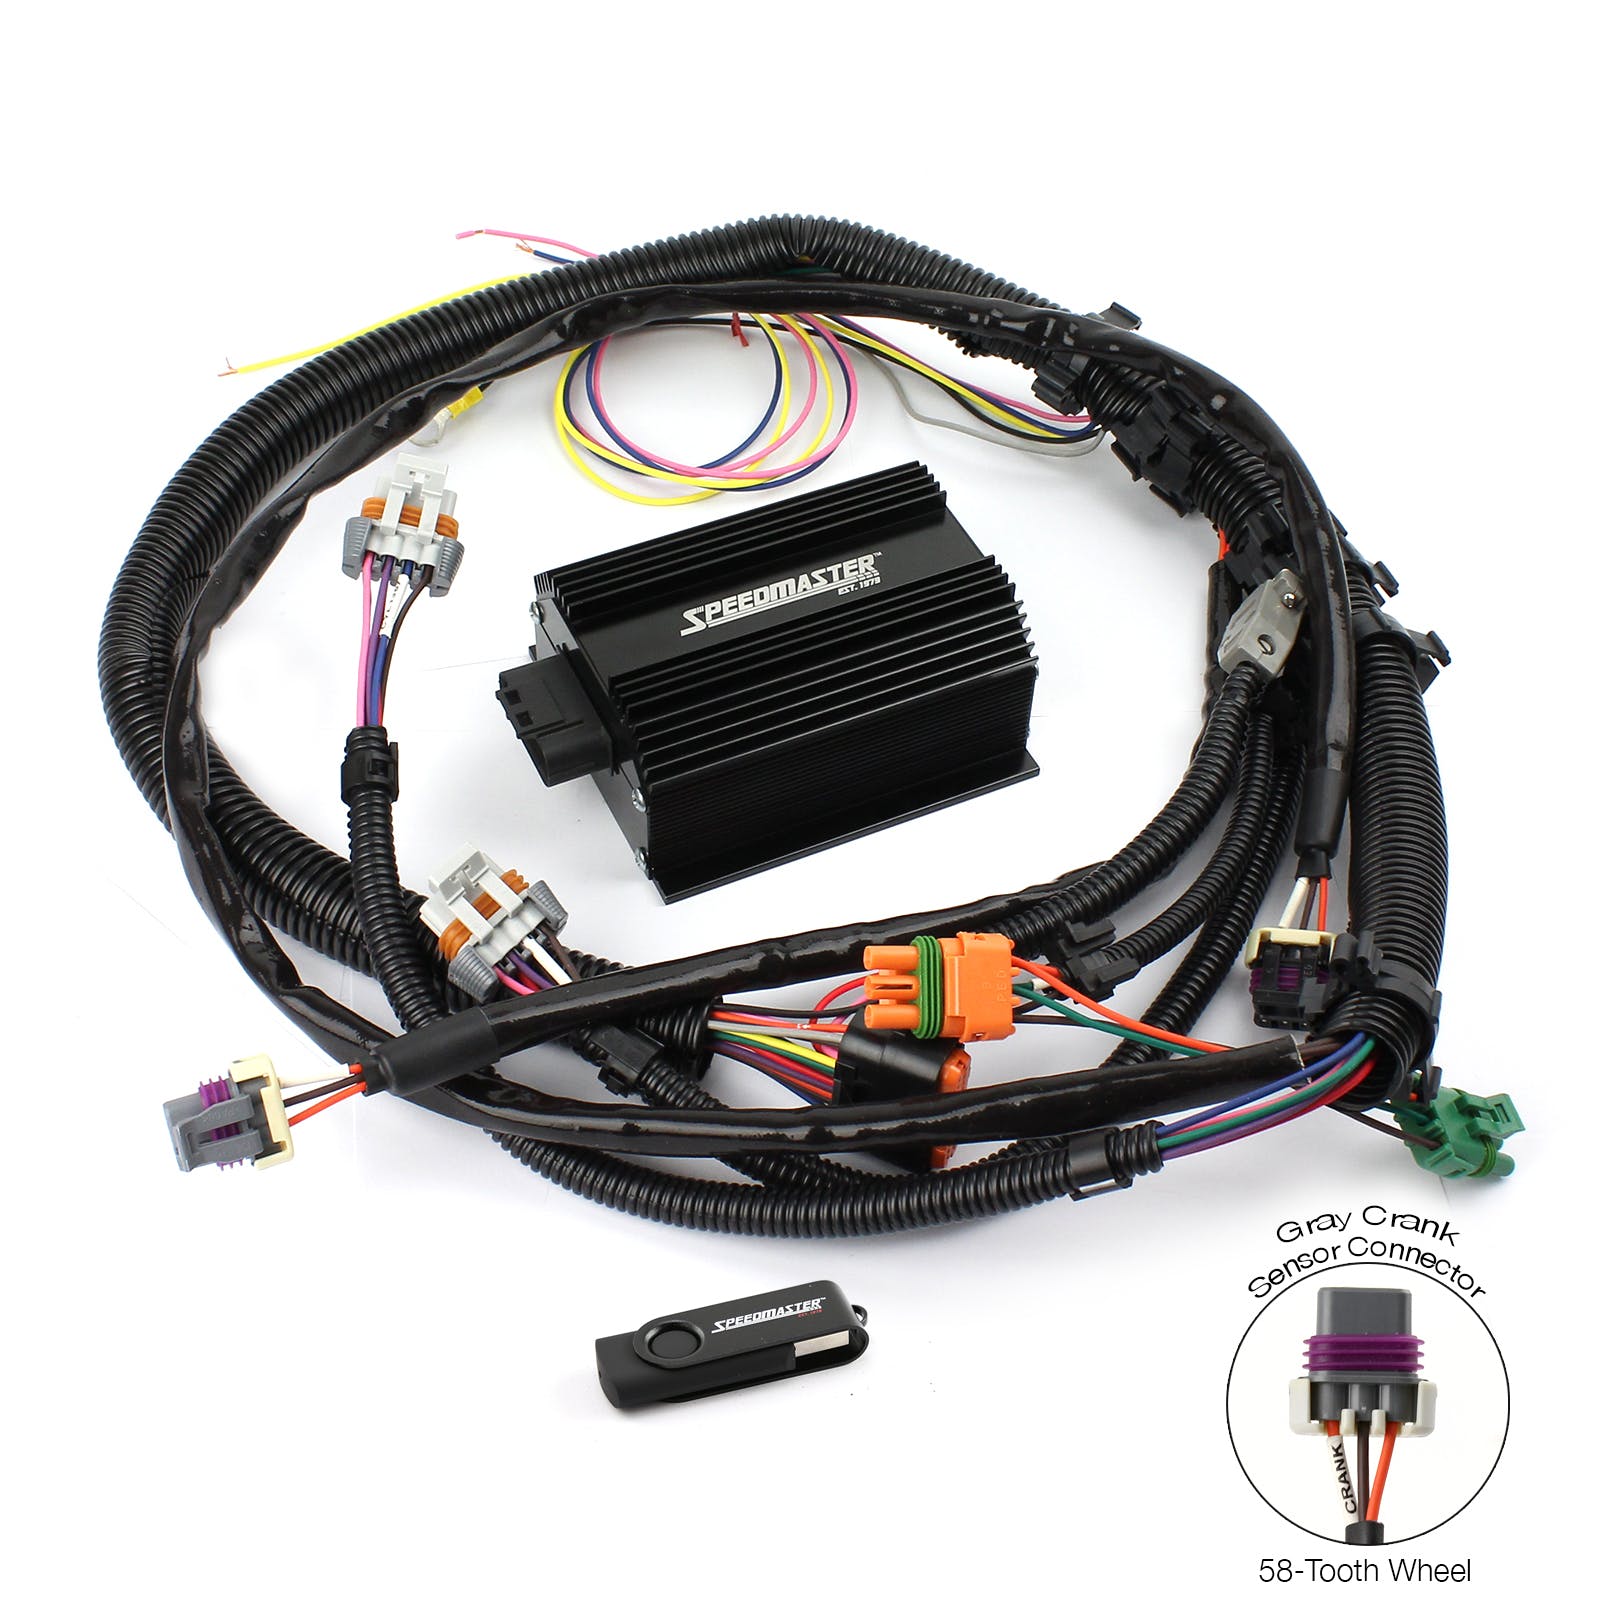 Speedmaster PCE548.1003 58-Tooth Efi To Carbureted Ignition Controller Kit W/ Harness